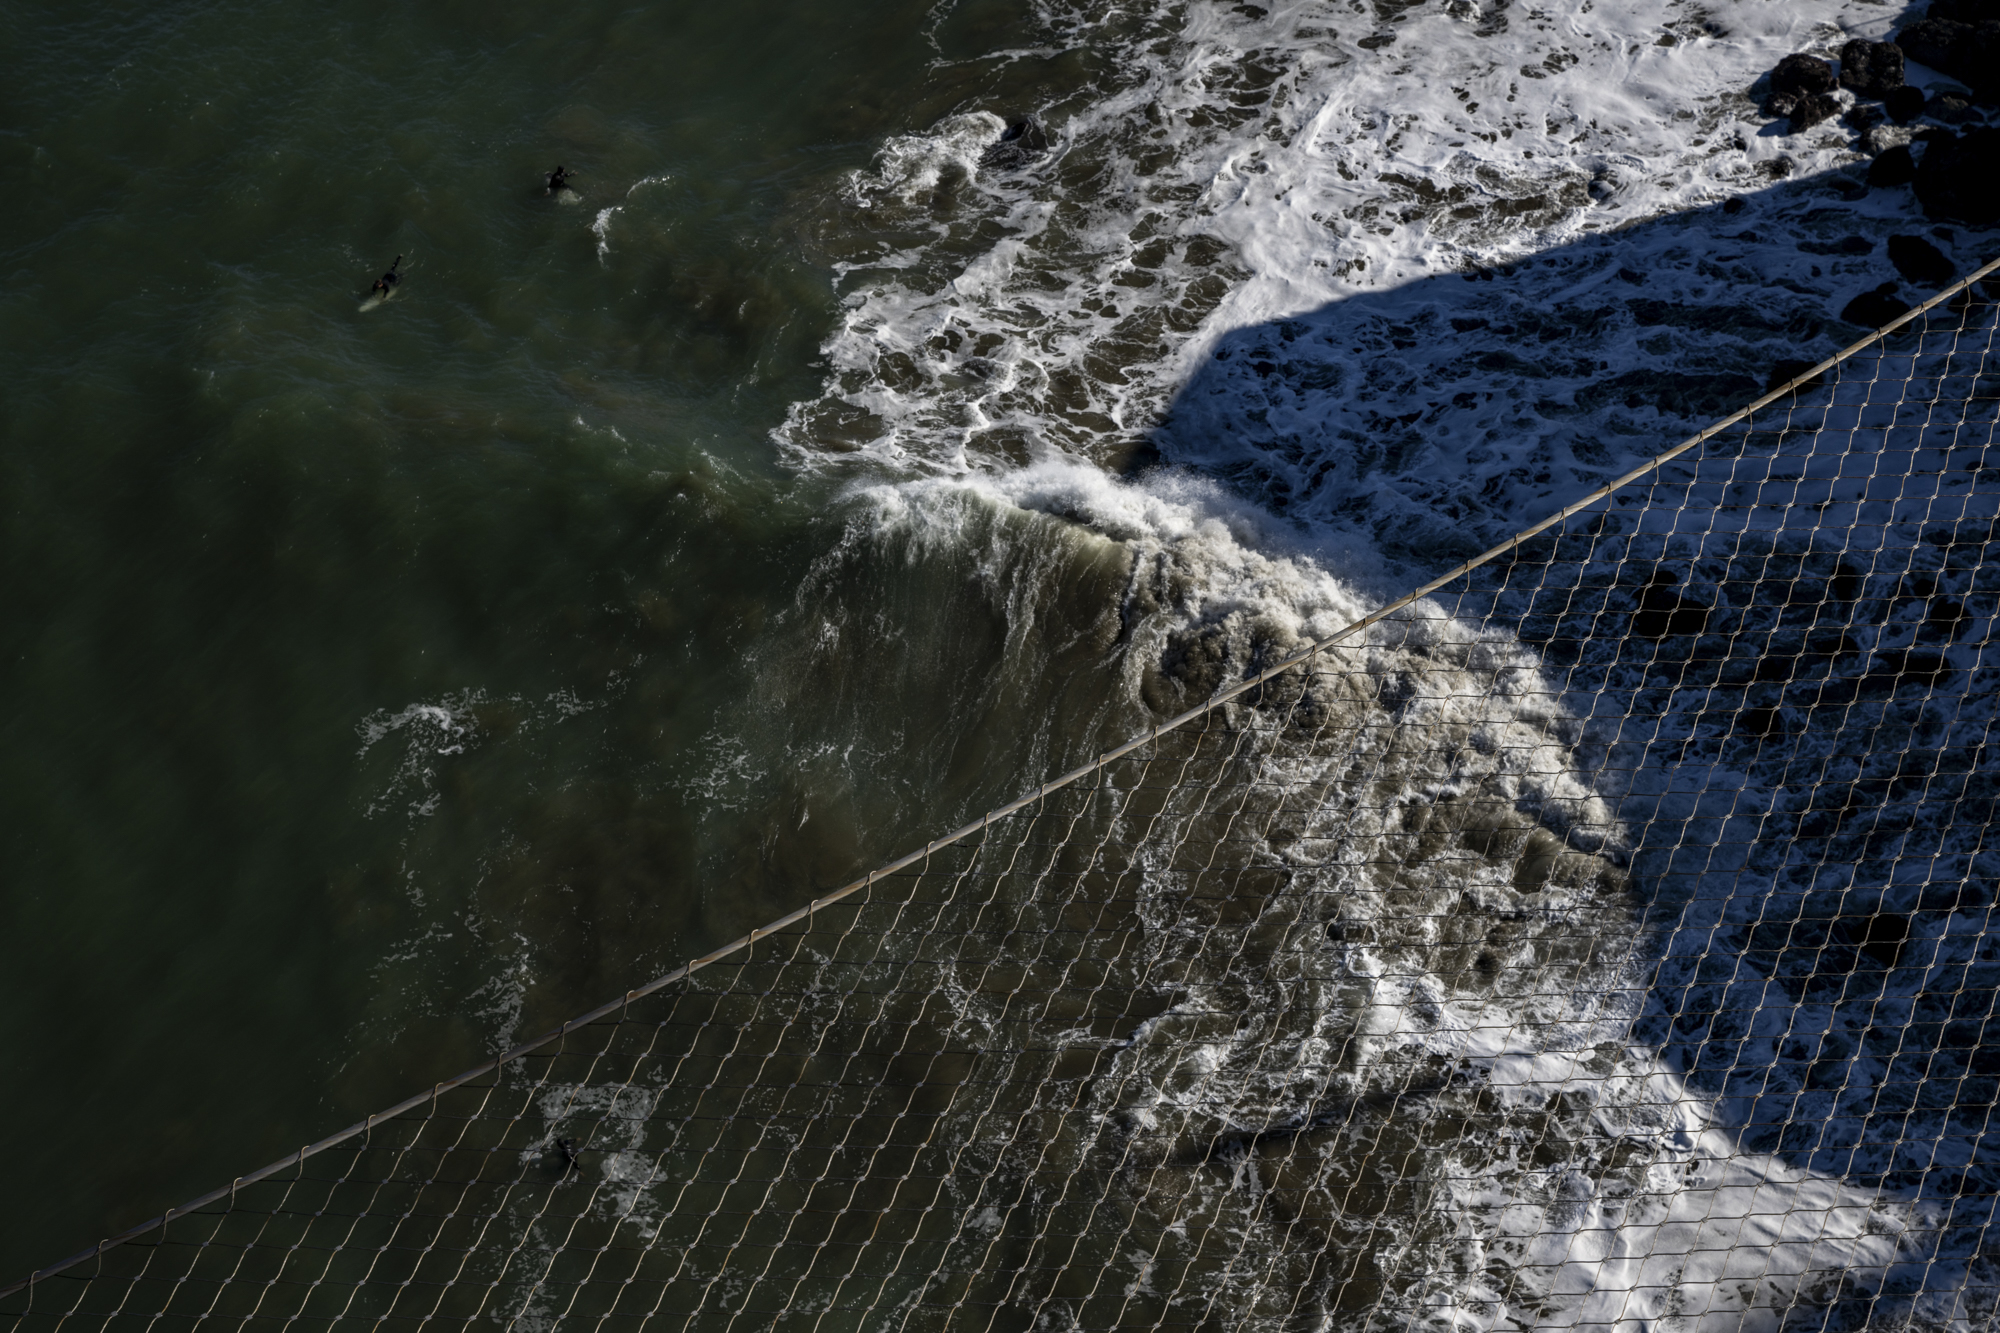 Swirling ocean waters with nets in foreground seen from above, on a bridge.